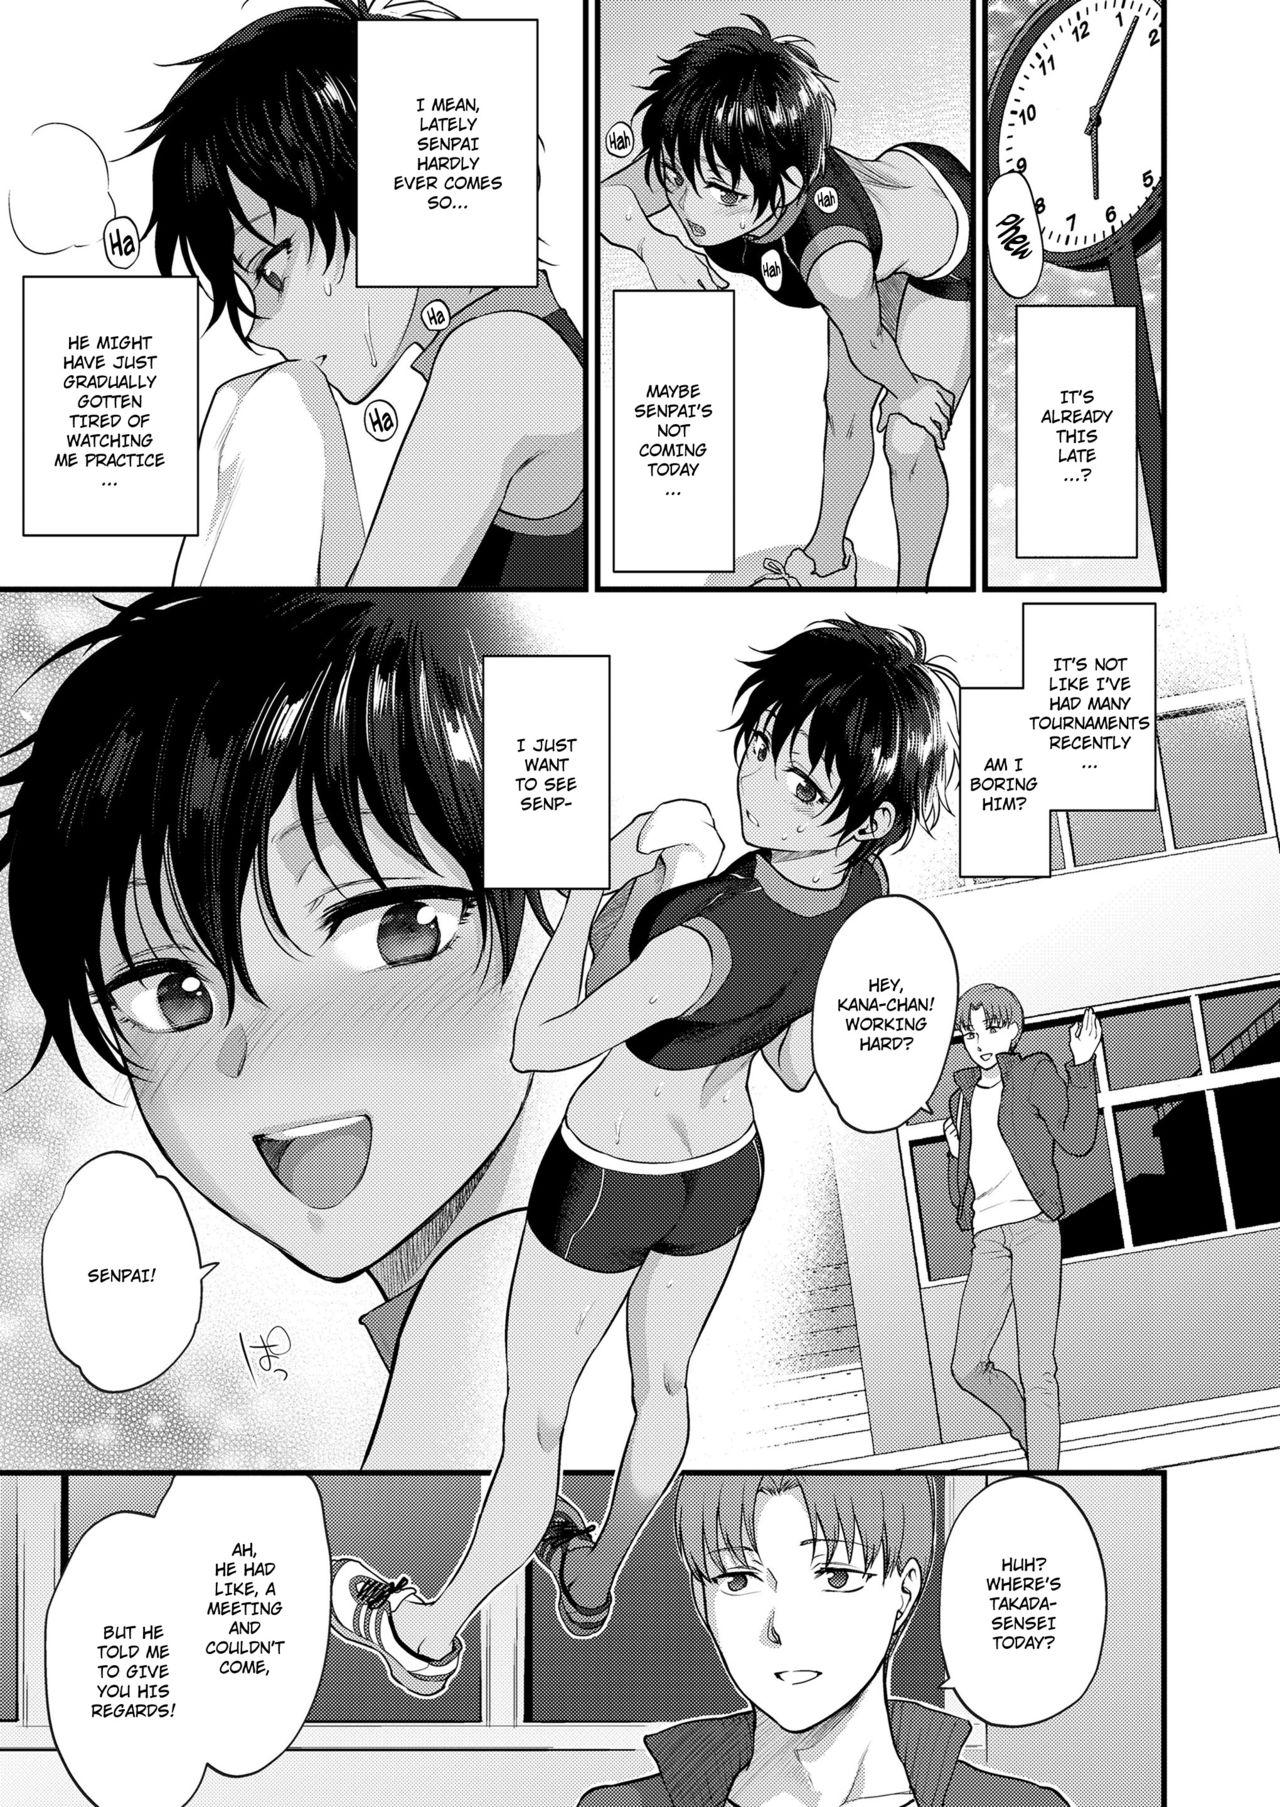 Cock Suckers Watashi no Koto dake Mite Hoshii | I Want You to Look at Me Only Ass Fuck - Page 5